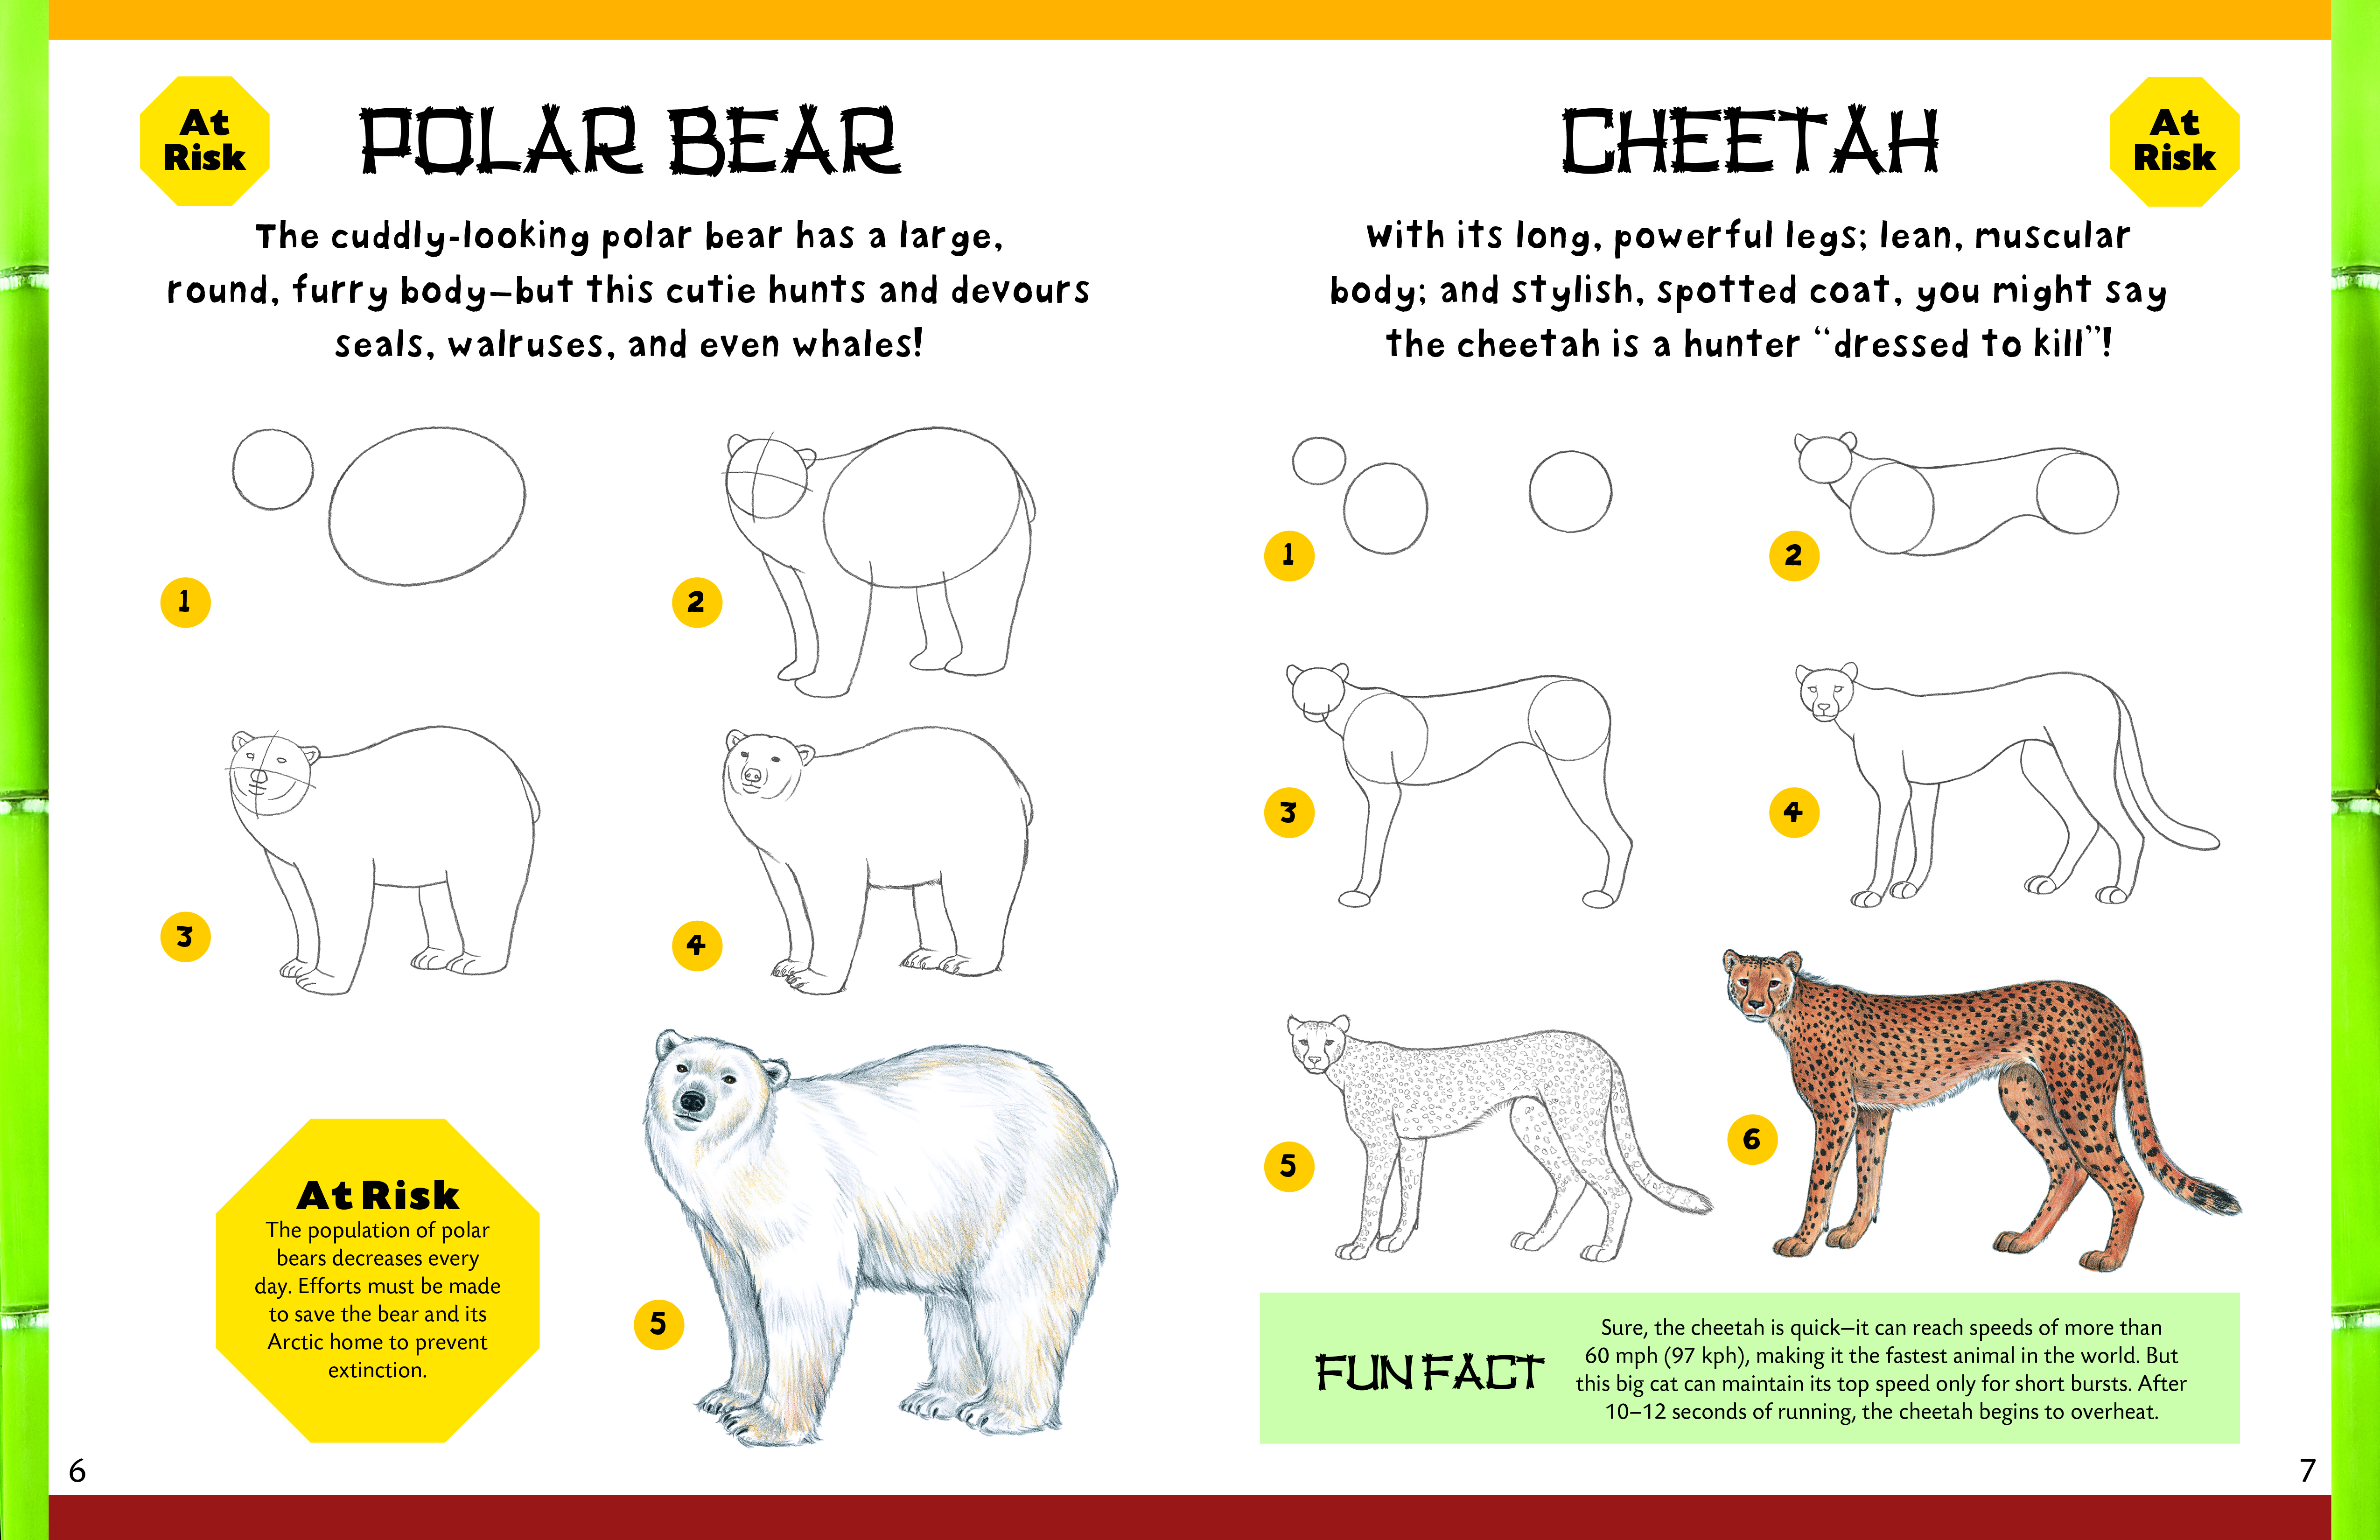 How to Draw Zoo Animals by Diana Fisher | Quarto At A Glance | The Quarto  Group